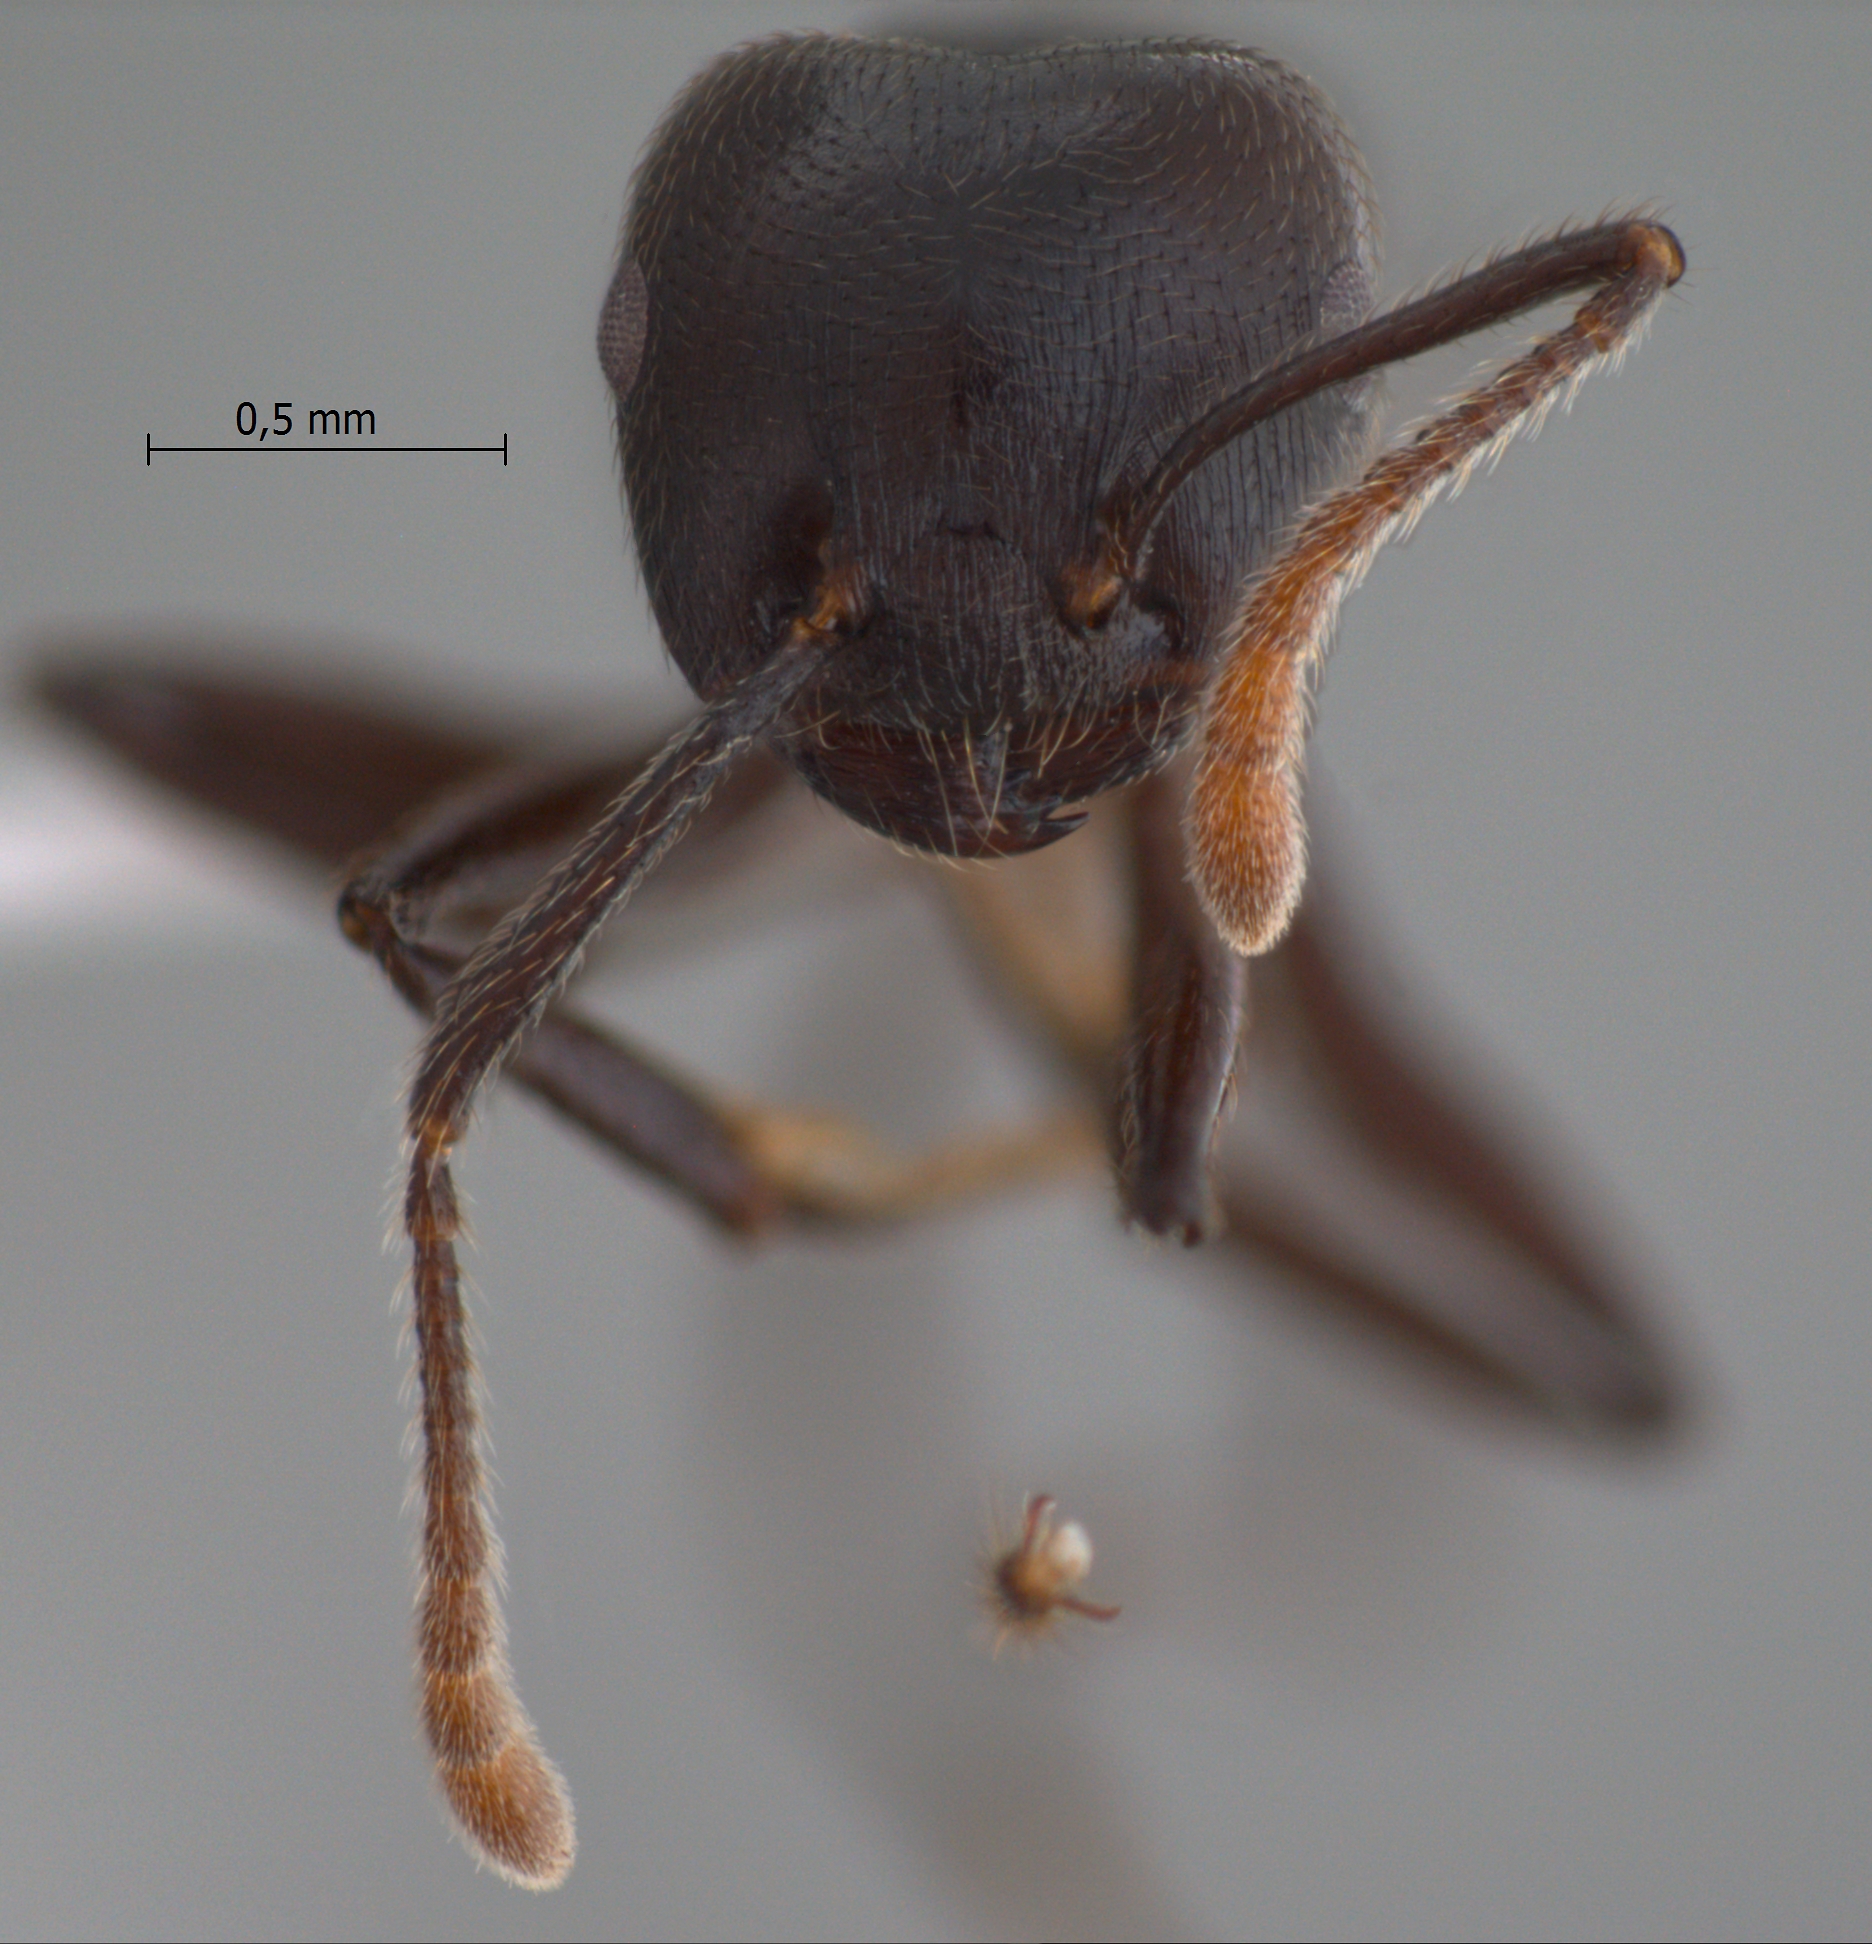 Crematogaster physothorax frontal